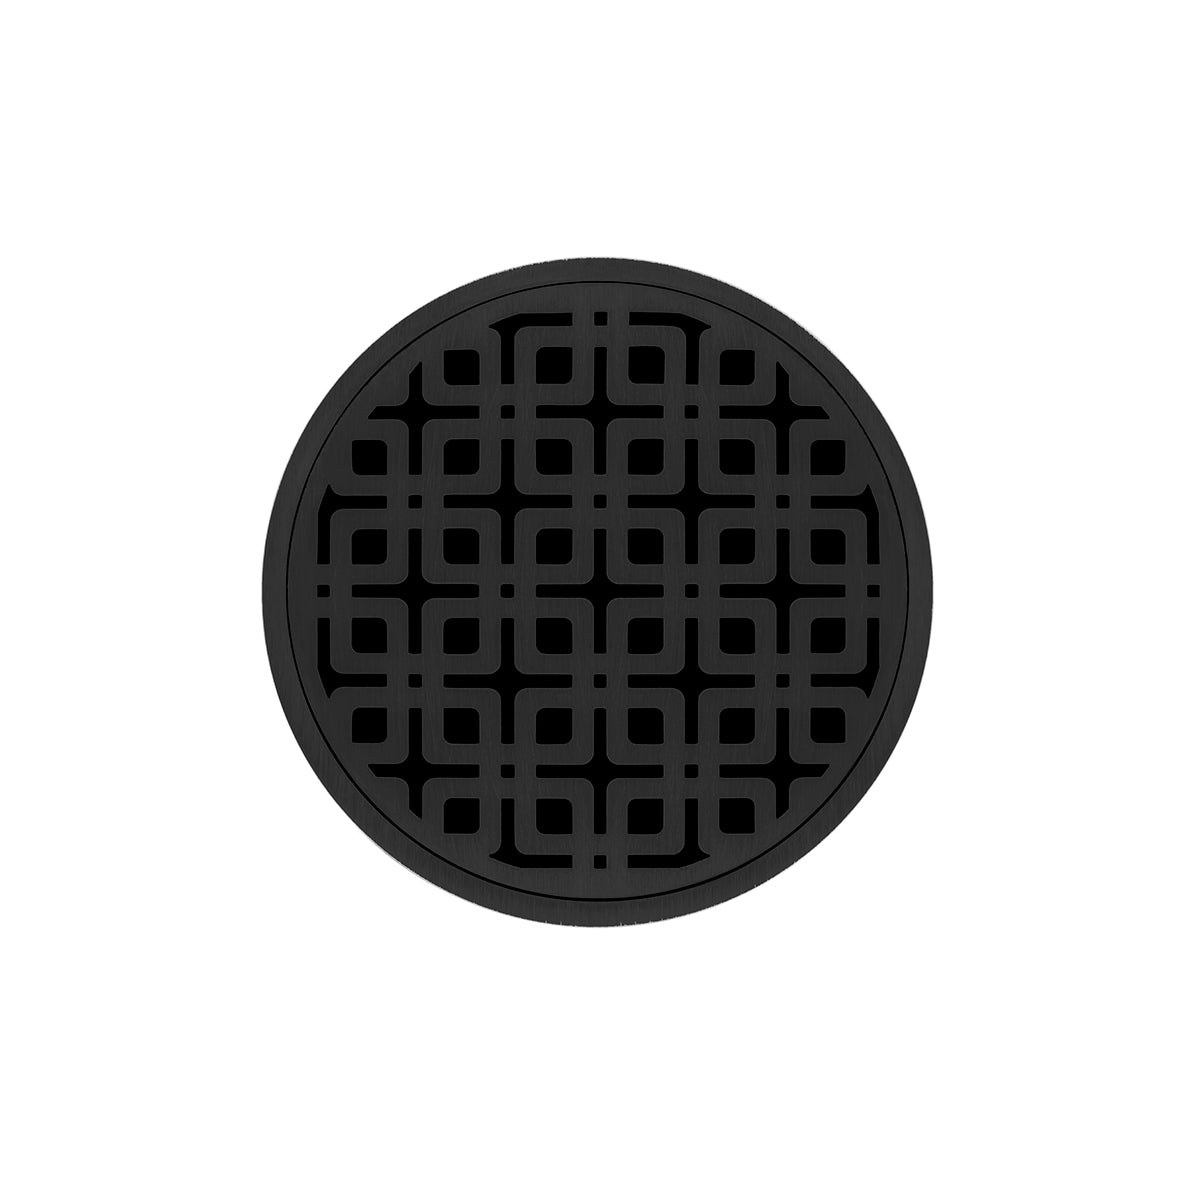 Infinity Drain 5" Round RKD 5 Premium Center Drain Kit with Link Pattern Decorative Plate with ABS Drain Body, 2" Outlet